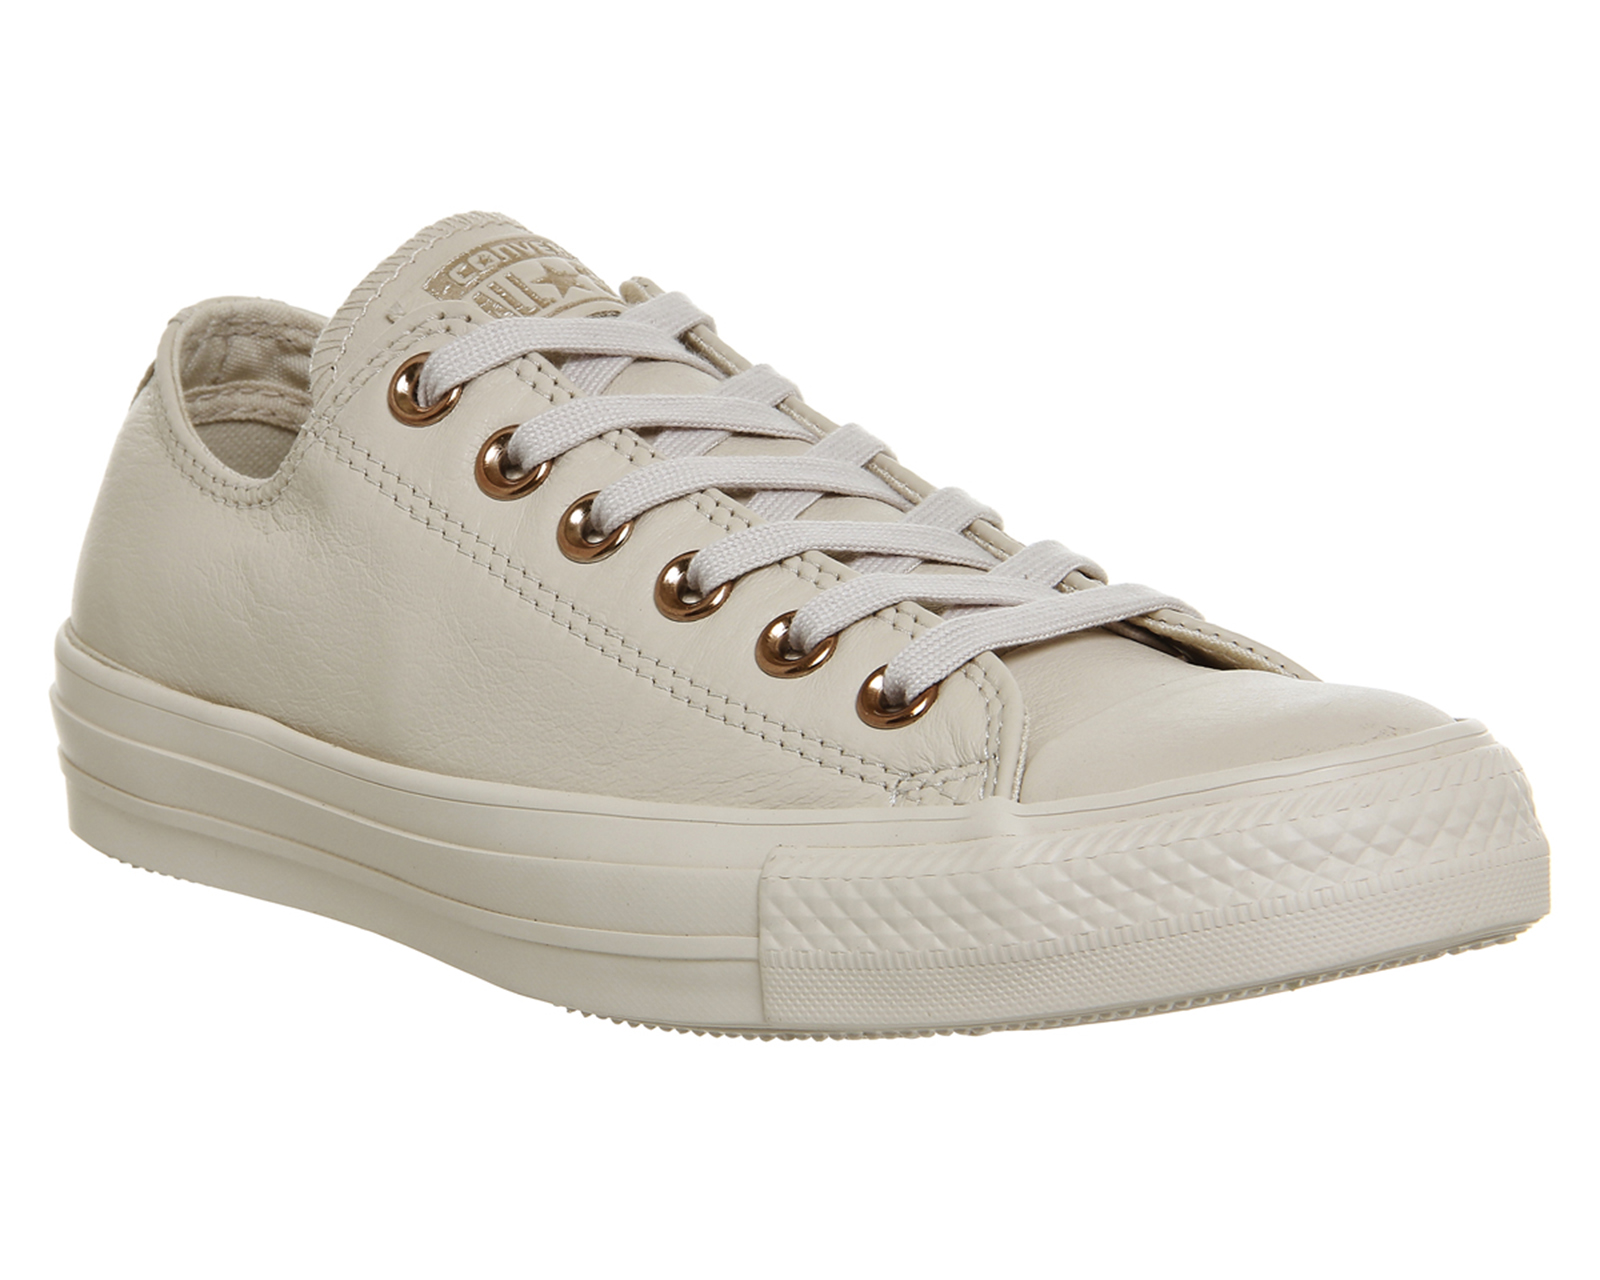 converse allstar low leather ivory cream light gold exclusive